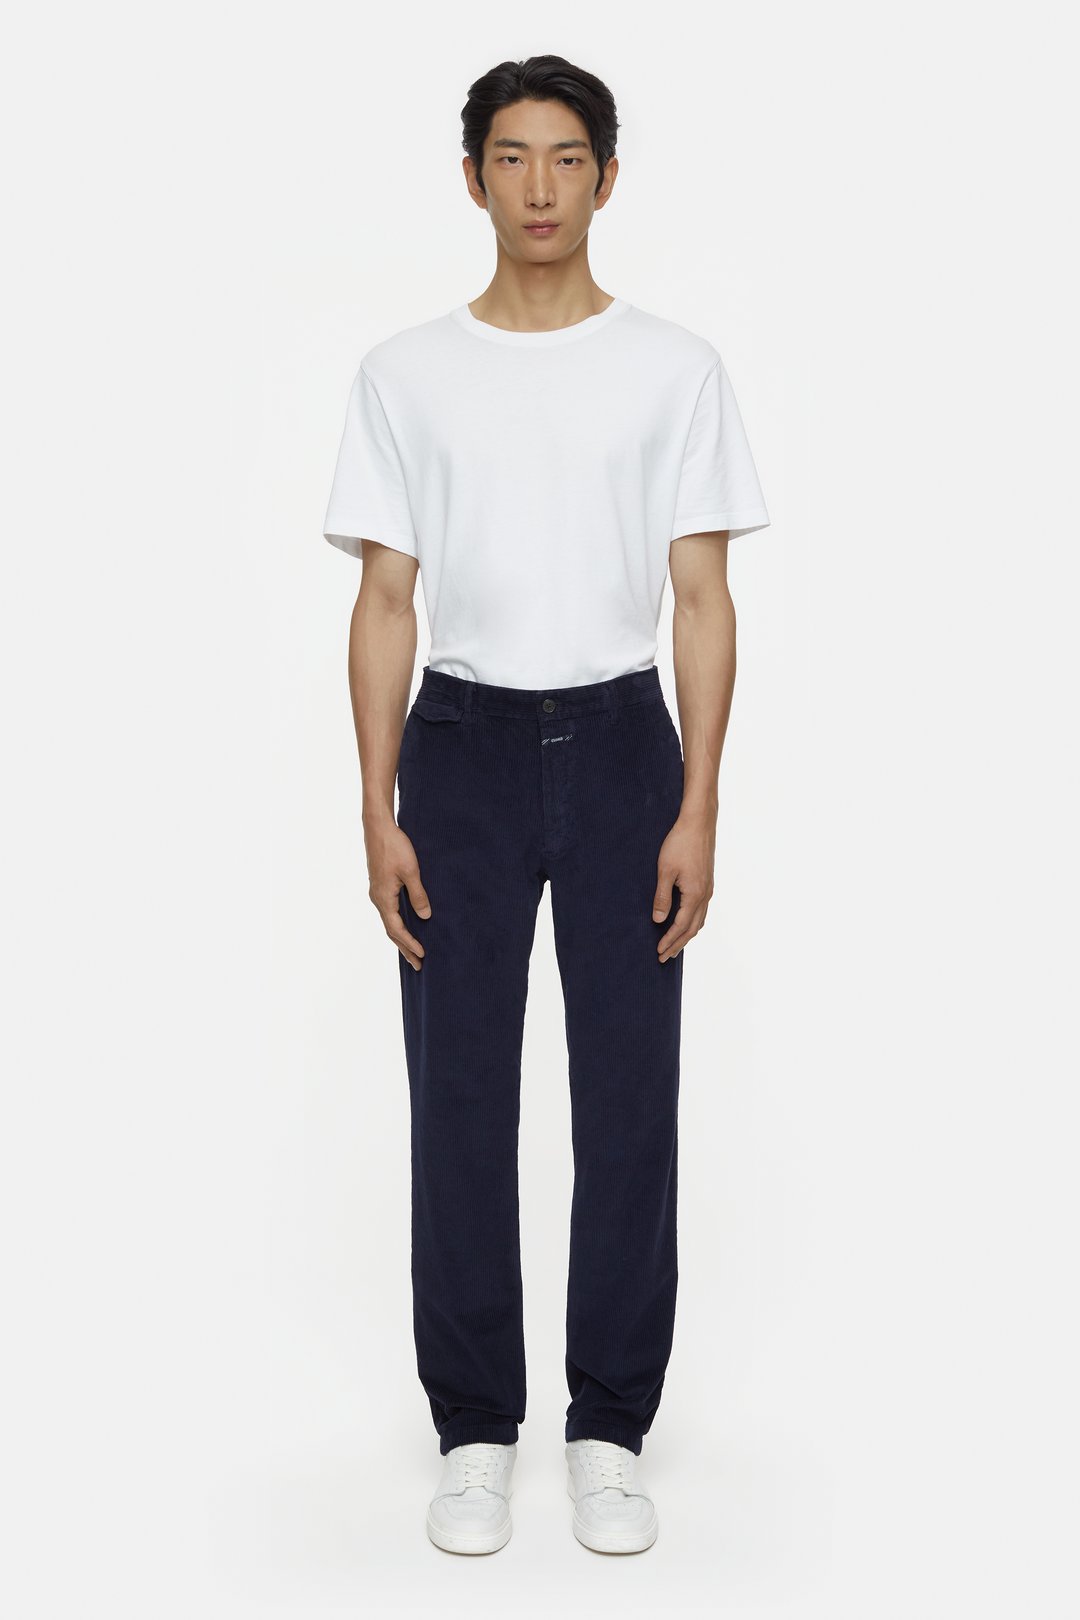 Reiss Ramsay - Pleat Front Tapered Trousers in Soft Blue, Mens, Size 34 |  Compare | One New Change